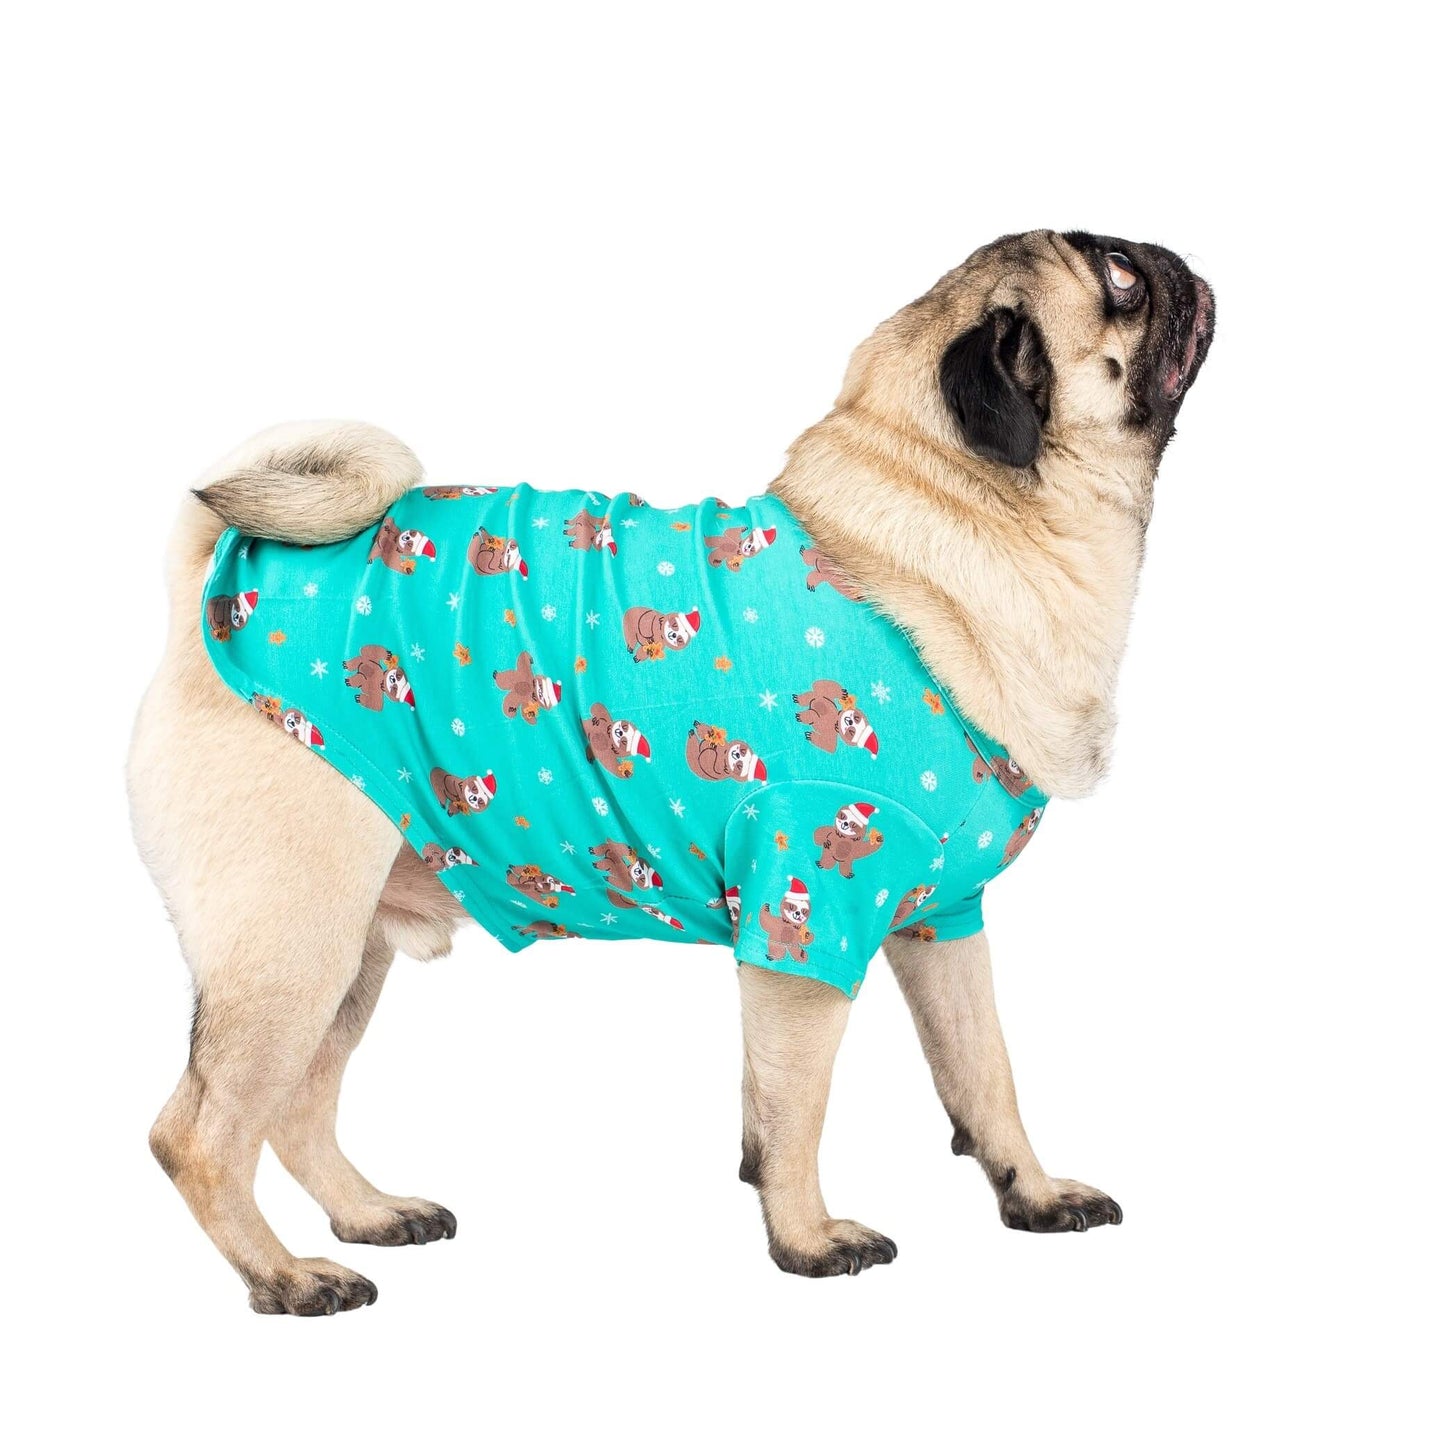 Stylish Pug in Festive Sloths Dog Shirt - Adorable Pug Dog Wearing a Green Christmas Shirt with Sloths in Santa Hats - Get Your Pug Ready for the Holidays with Trendy Dog Clothing - Shop Now for Dog Shirts and Dog Clothing.